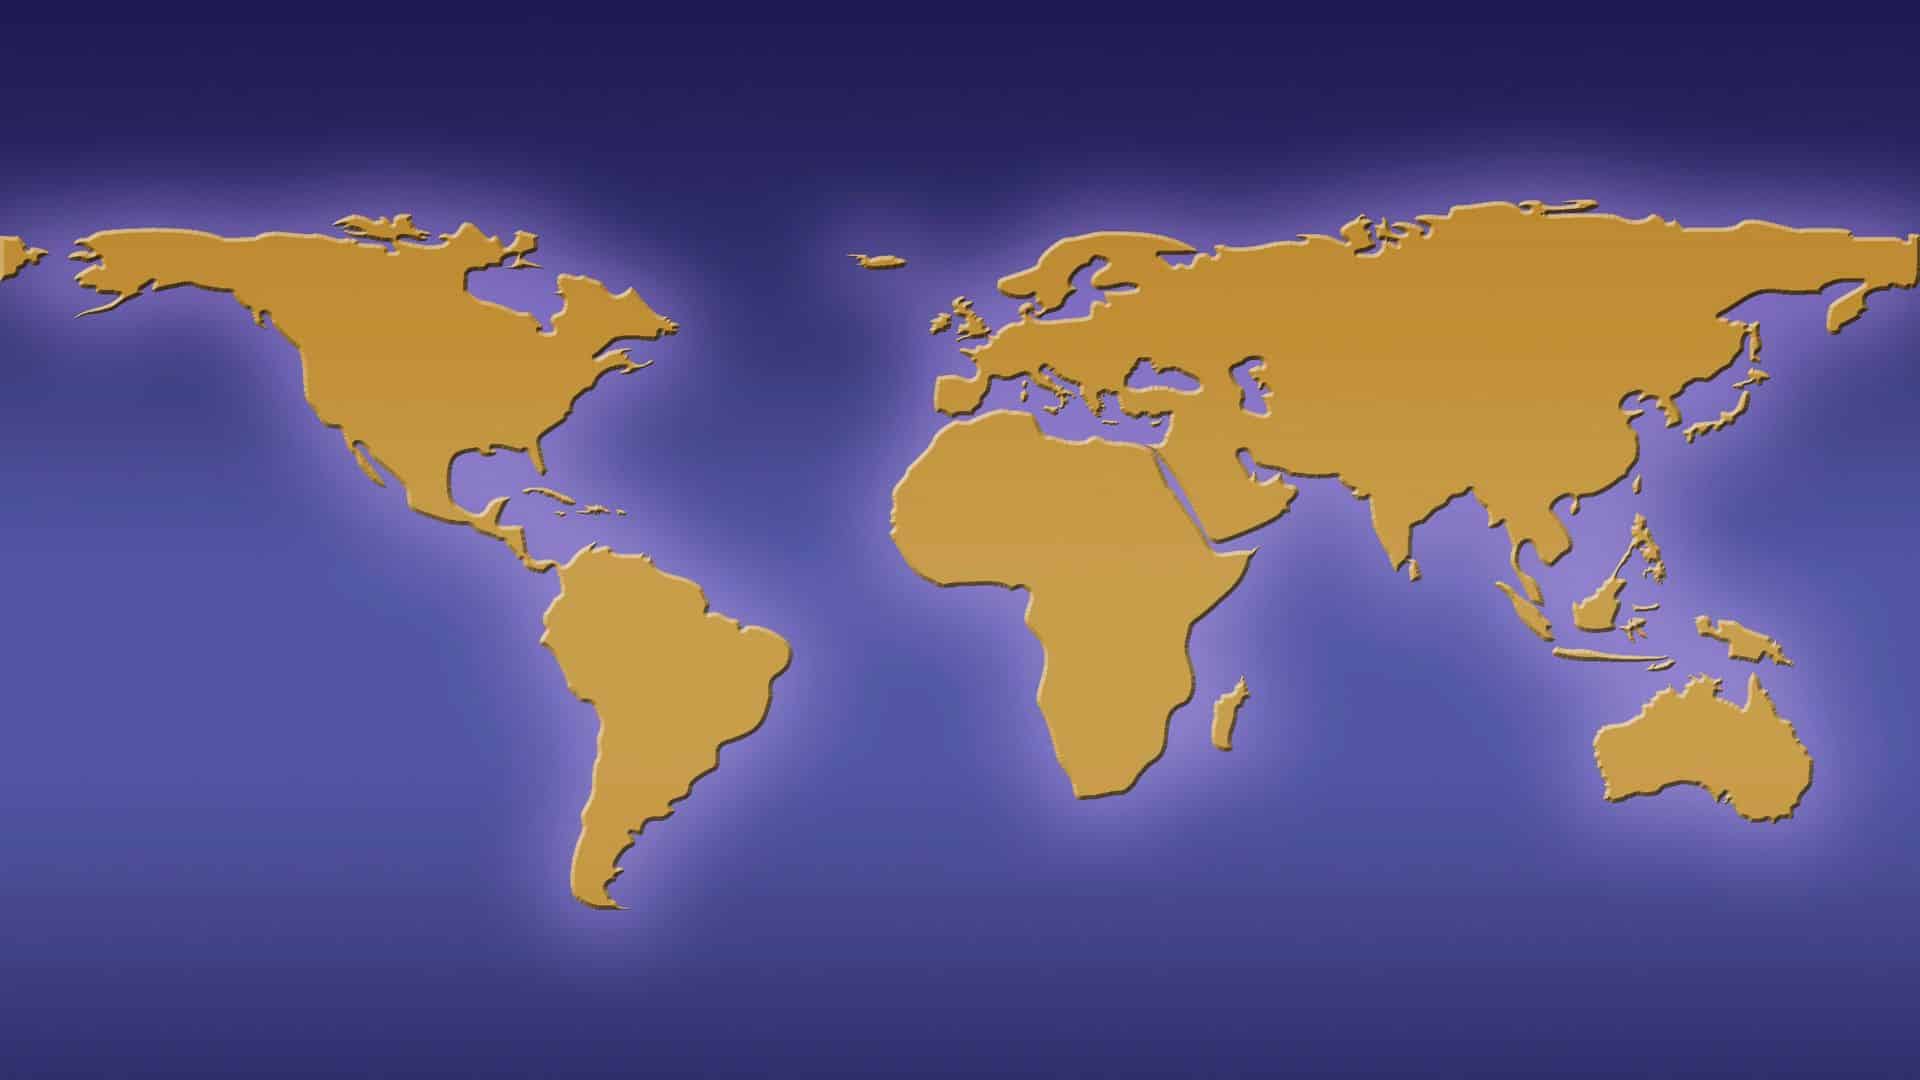 Image showing continents